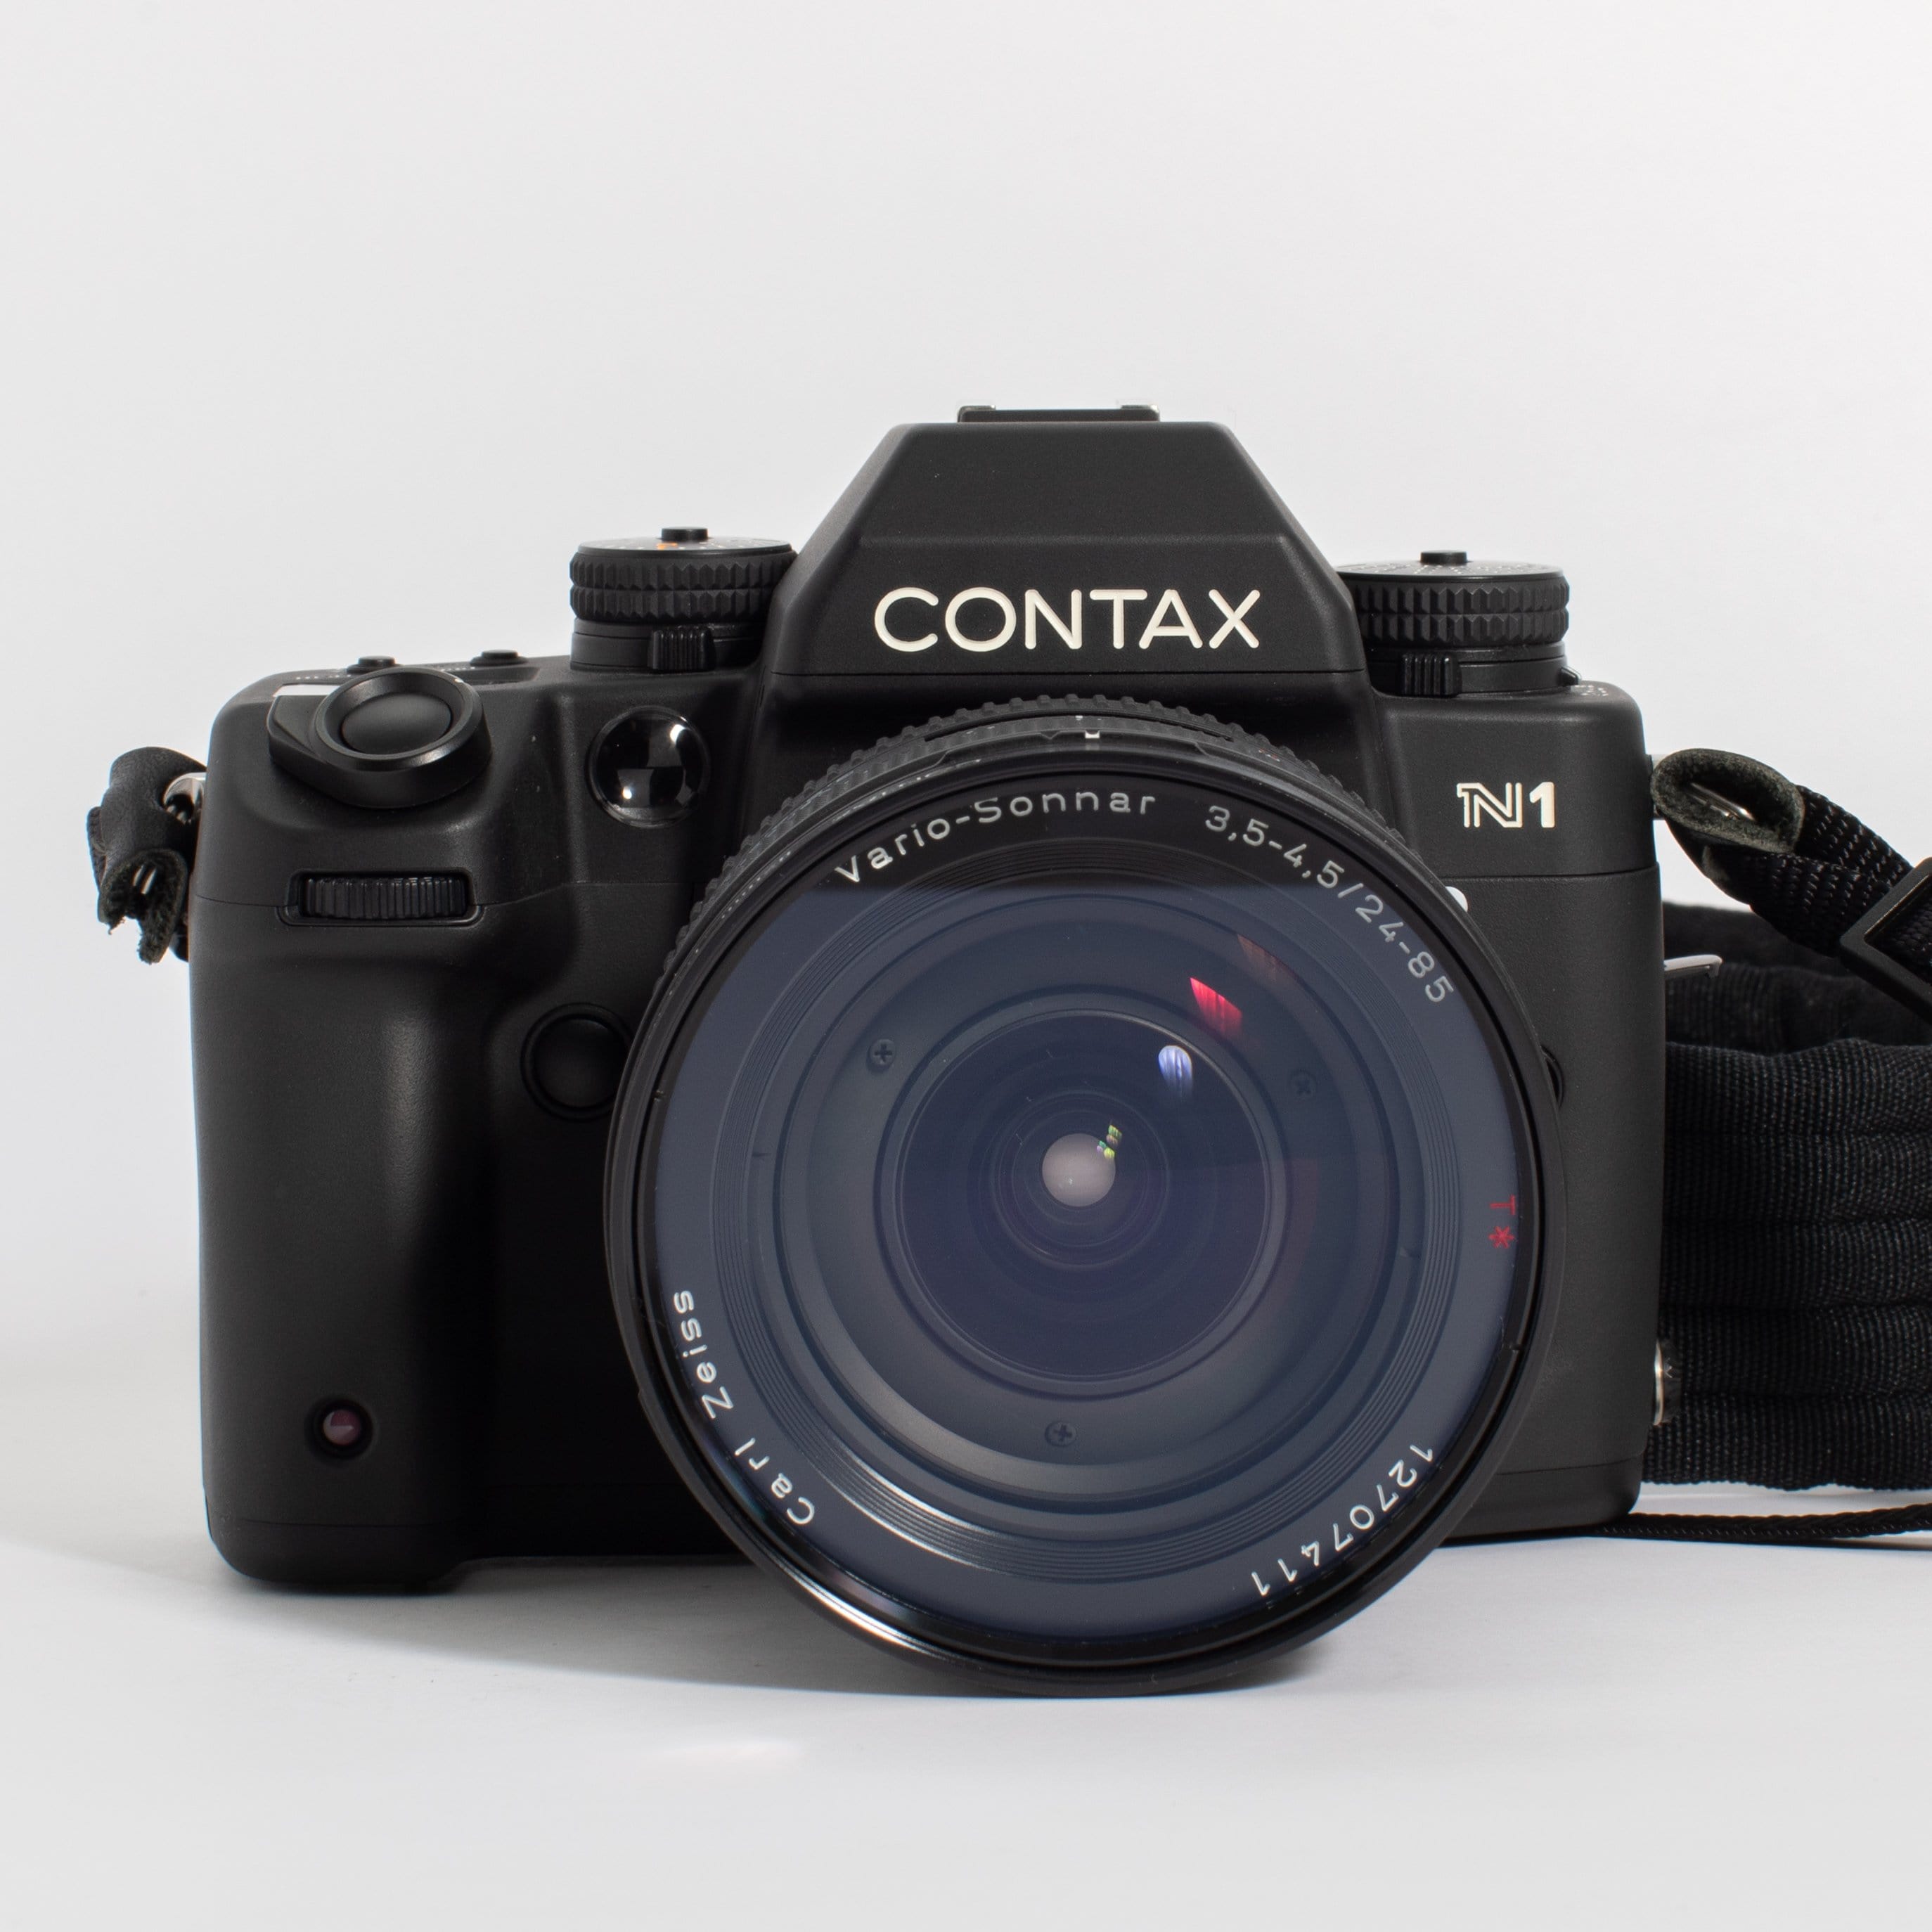 Contax N1 with Zeiss 24-85mm f/3.5-4.5 Lens and Flash – Film